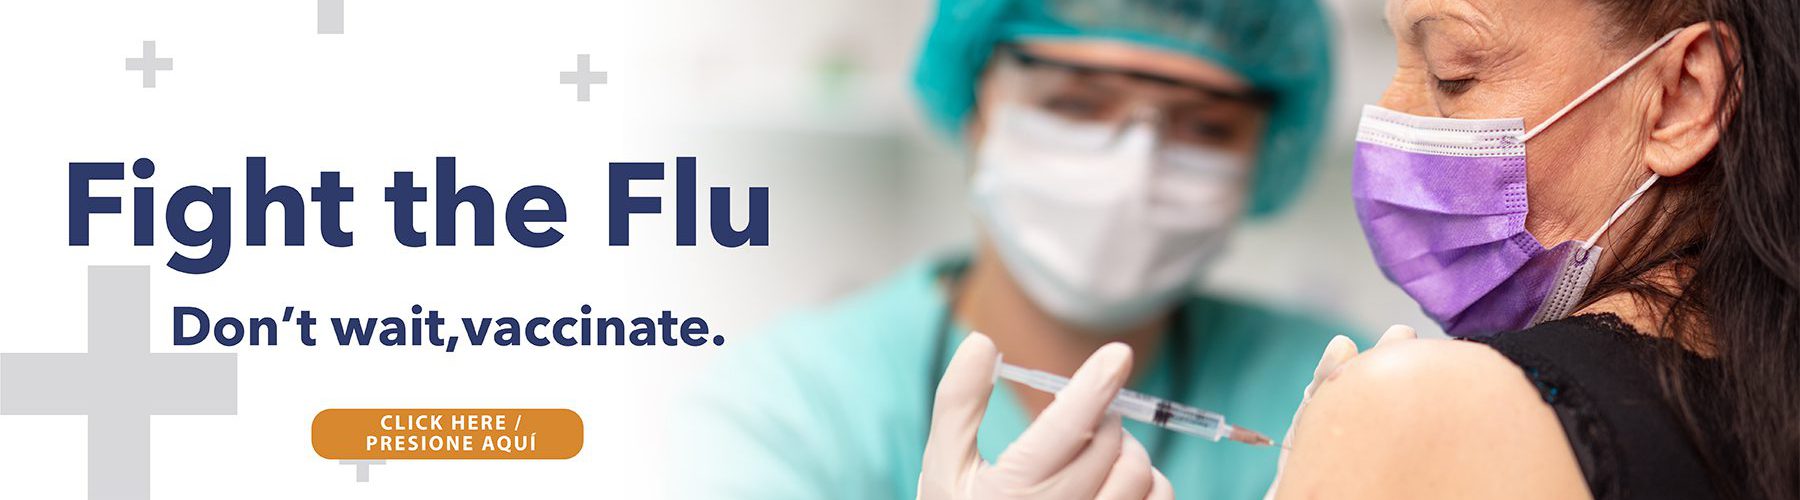 Fight The Flu. Don't wait, vaccinate.